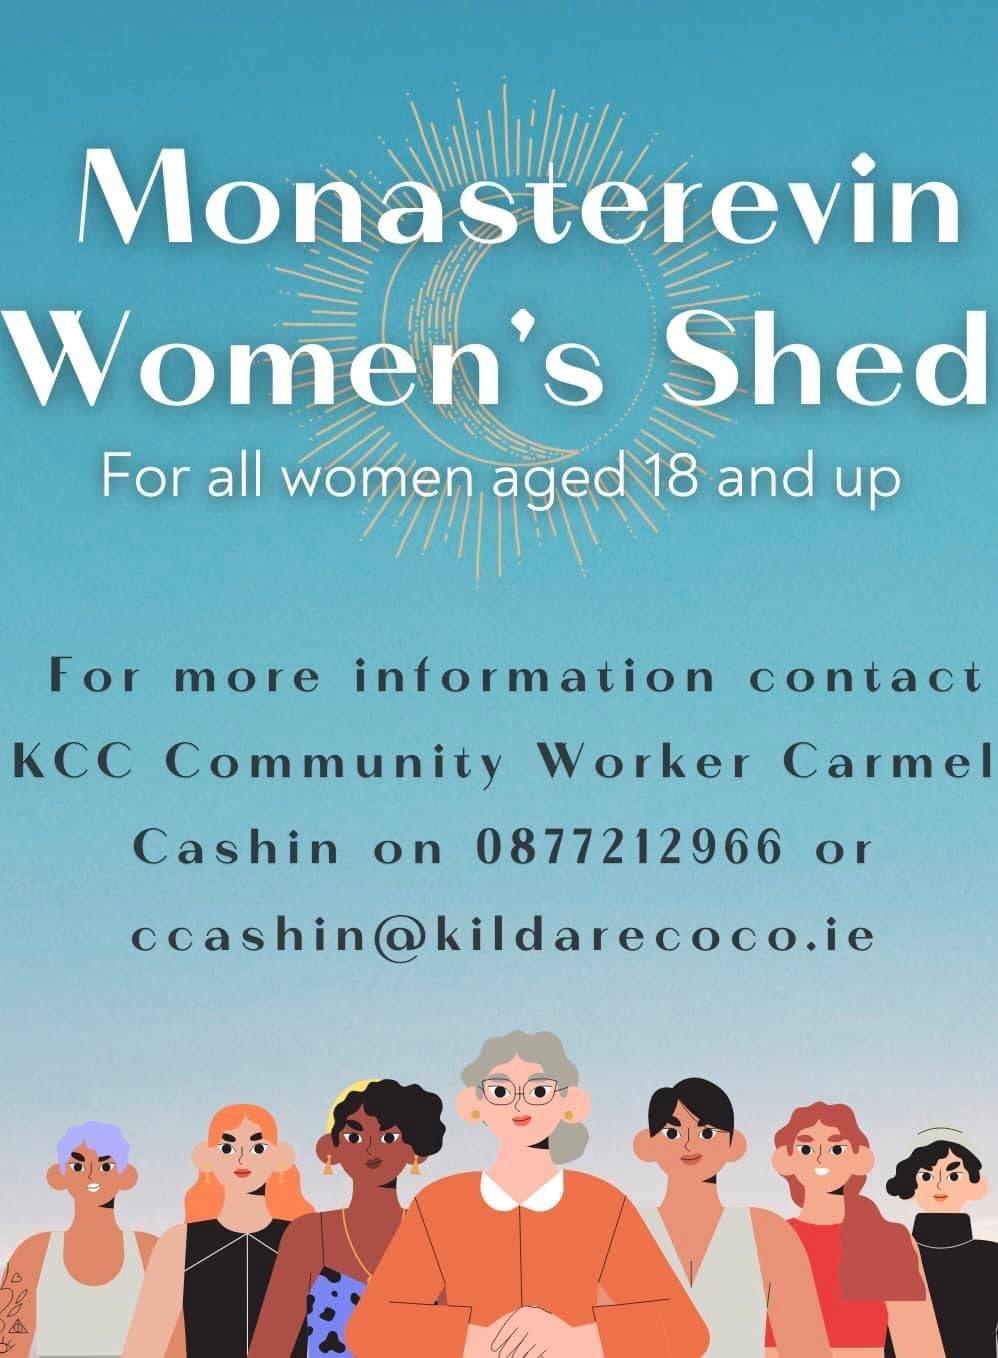 Monasterevin Women's Shed